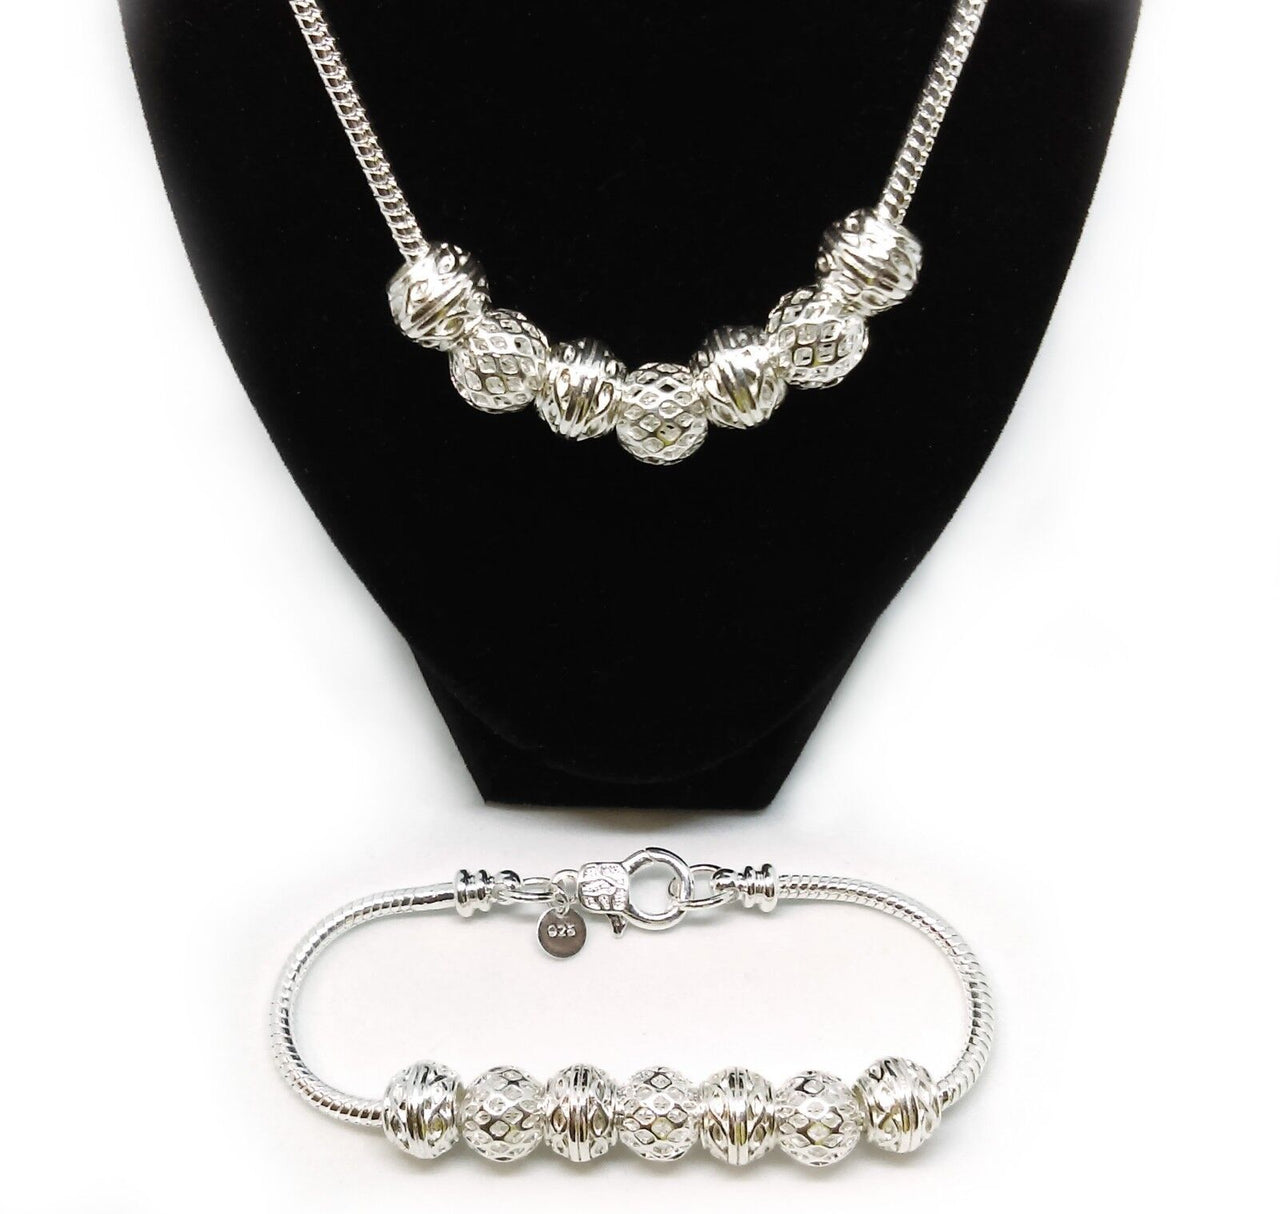 925 Sterling Silver Snake Chain 20" Necklace With Beaded Bracelet